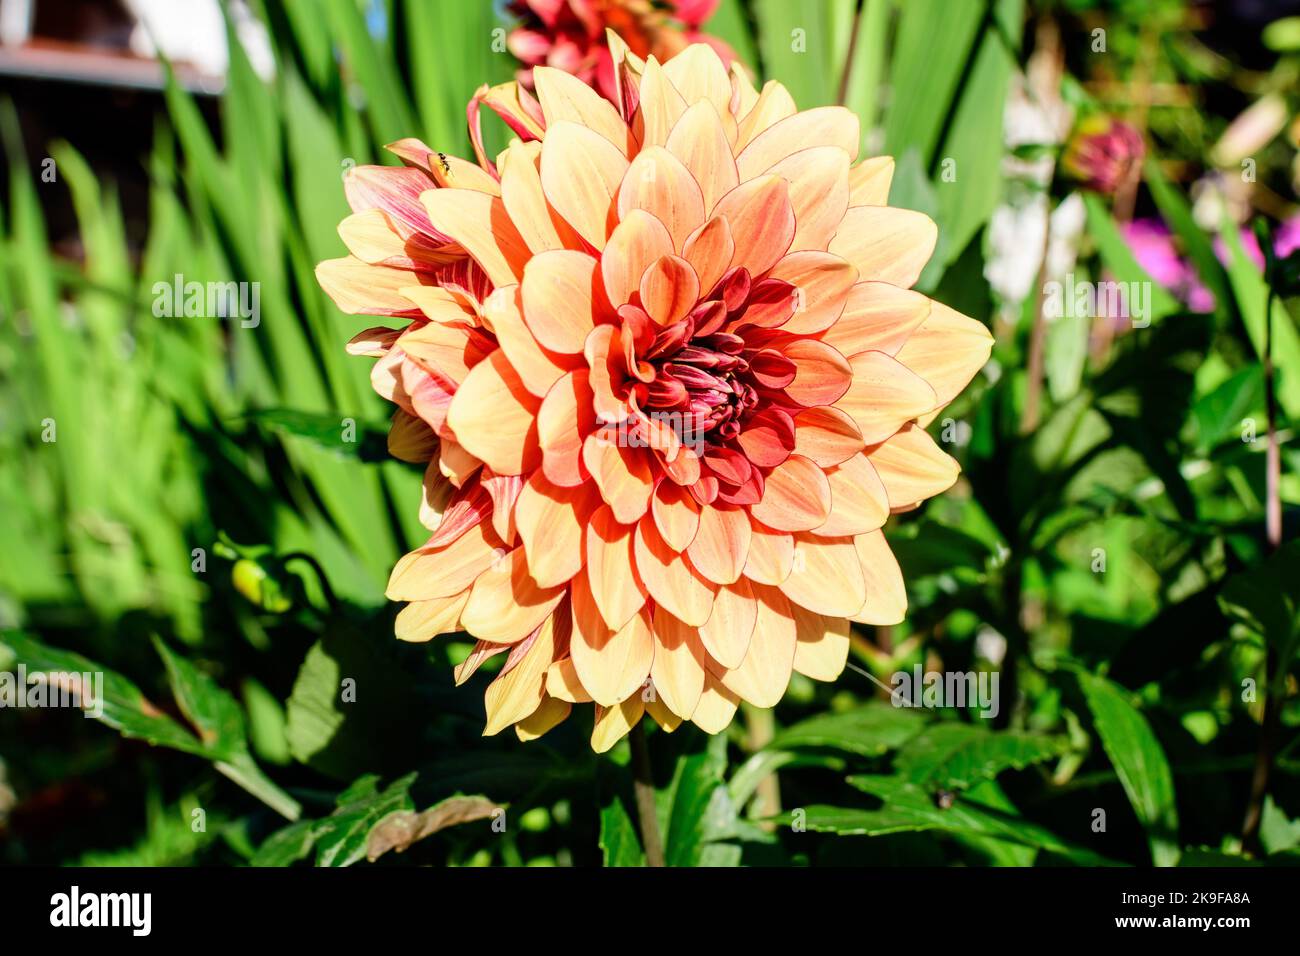 Close up of one beautiful large vivid orange dahlia flower in full bloom on blurred green background, photographed with soft focus in a garden in a su Stock Photo